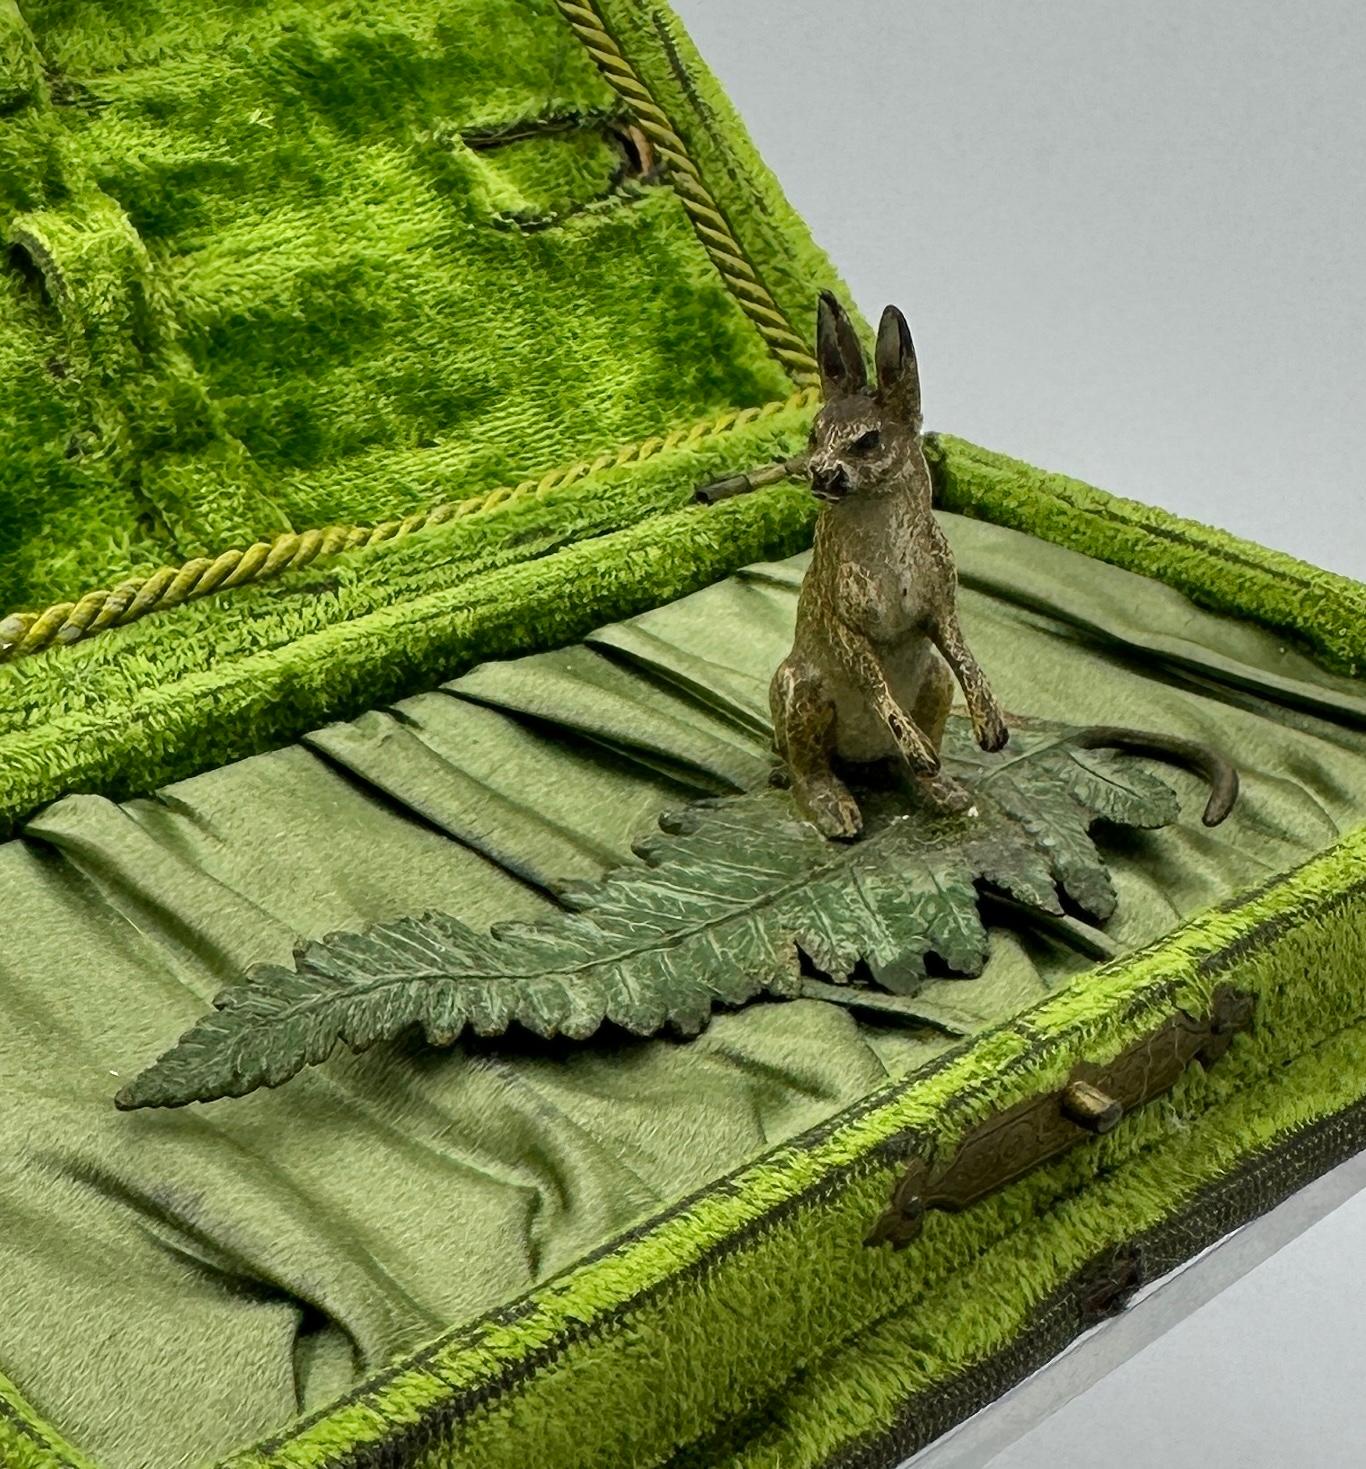 THIS IS A SUPERB ANTIQUE AUSTRIAN VIENNA BRONZE OF A BUNNY RABBIT ON A FERN LEAF.
This wonderful antique Austrian Vienna Bronze (Bronze de Vienne, Wiener Bronze, Cold Painted Bronze) dates to circa 1900-1930.  The bronze is of the highest quality of